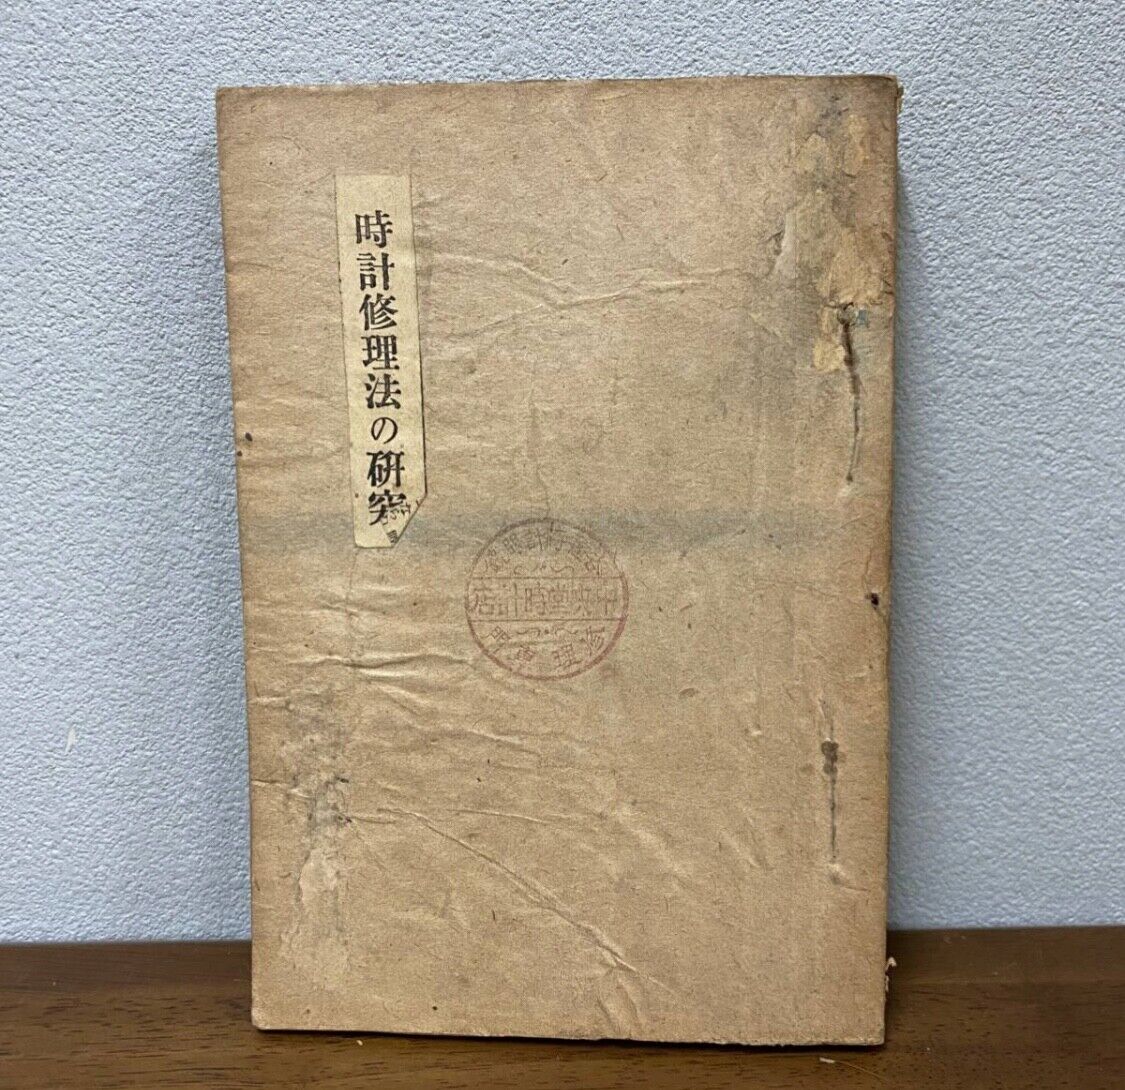 World War II Imperial Japanese Watch Repair Manual, 1941 Vintage Collectible